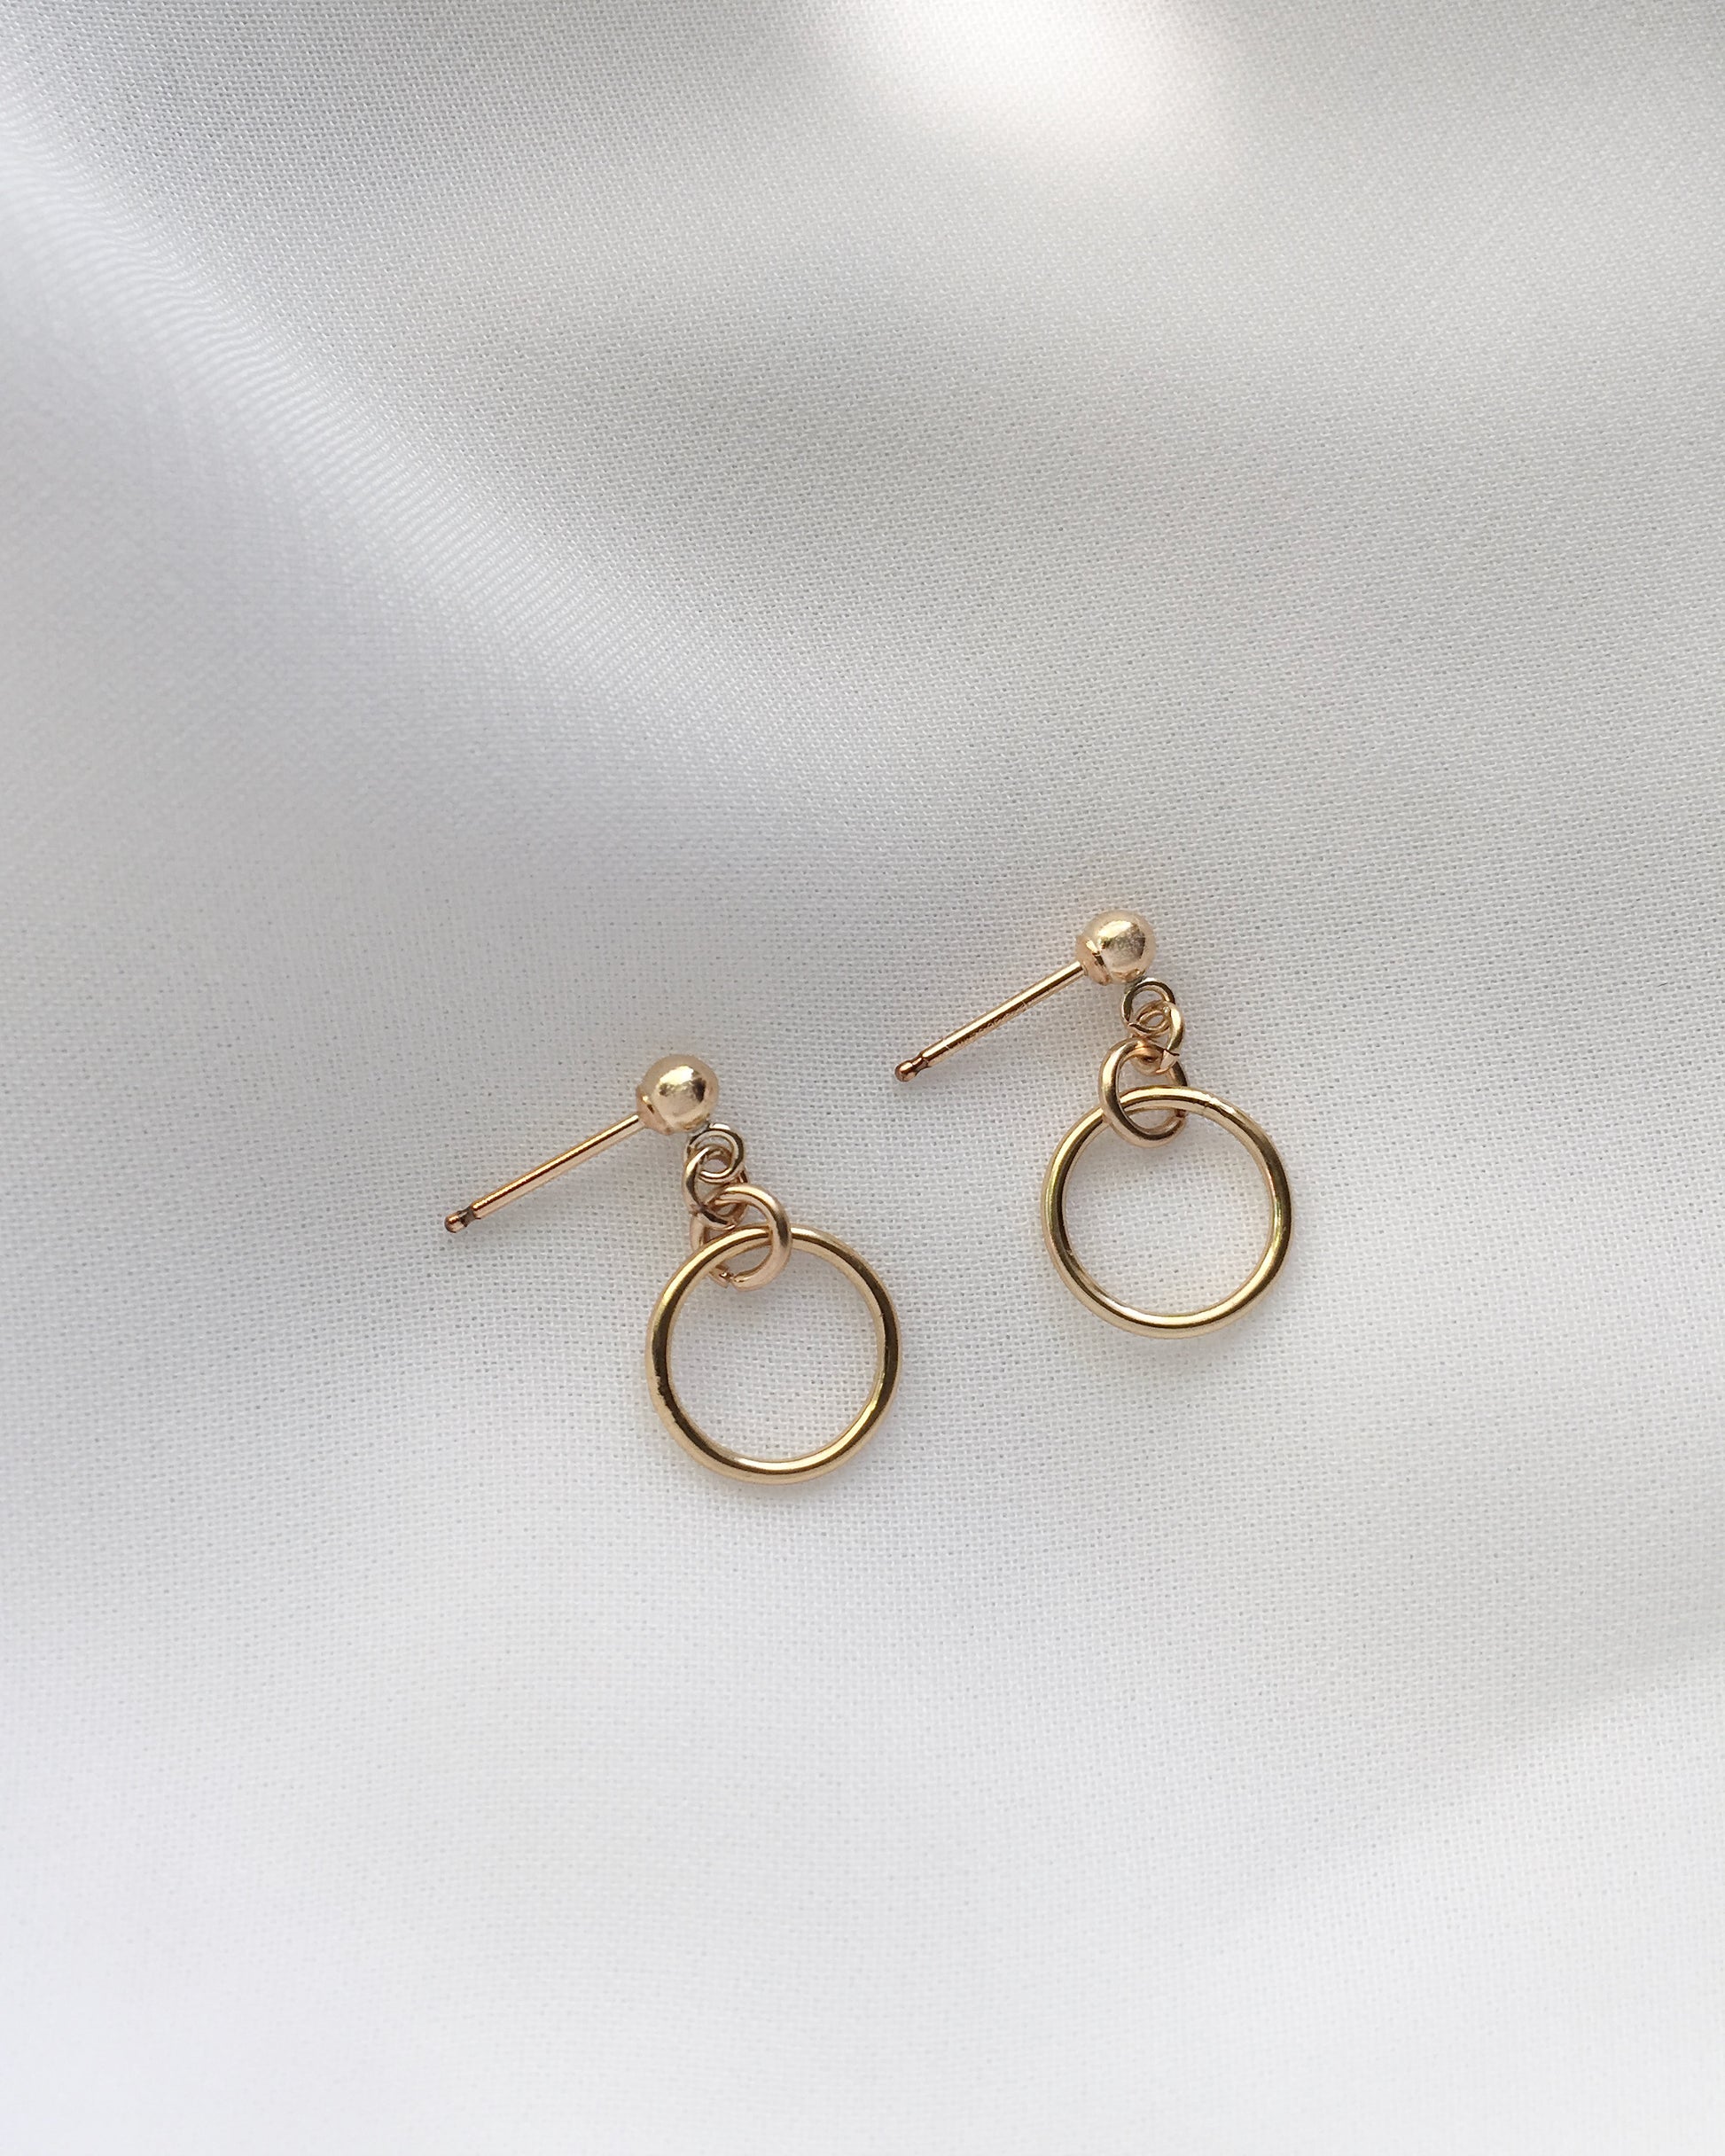 Mini Open Circle Drop Earrings in Gold Filled or Sterling Silver | IB Jewelry